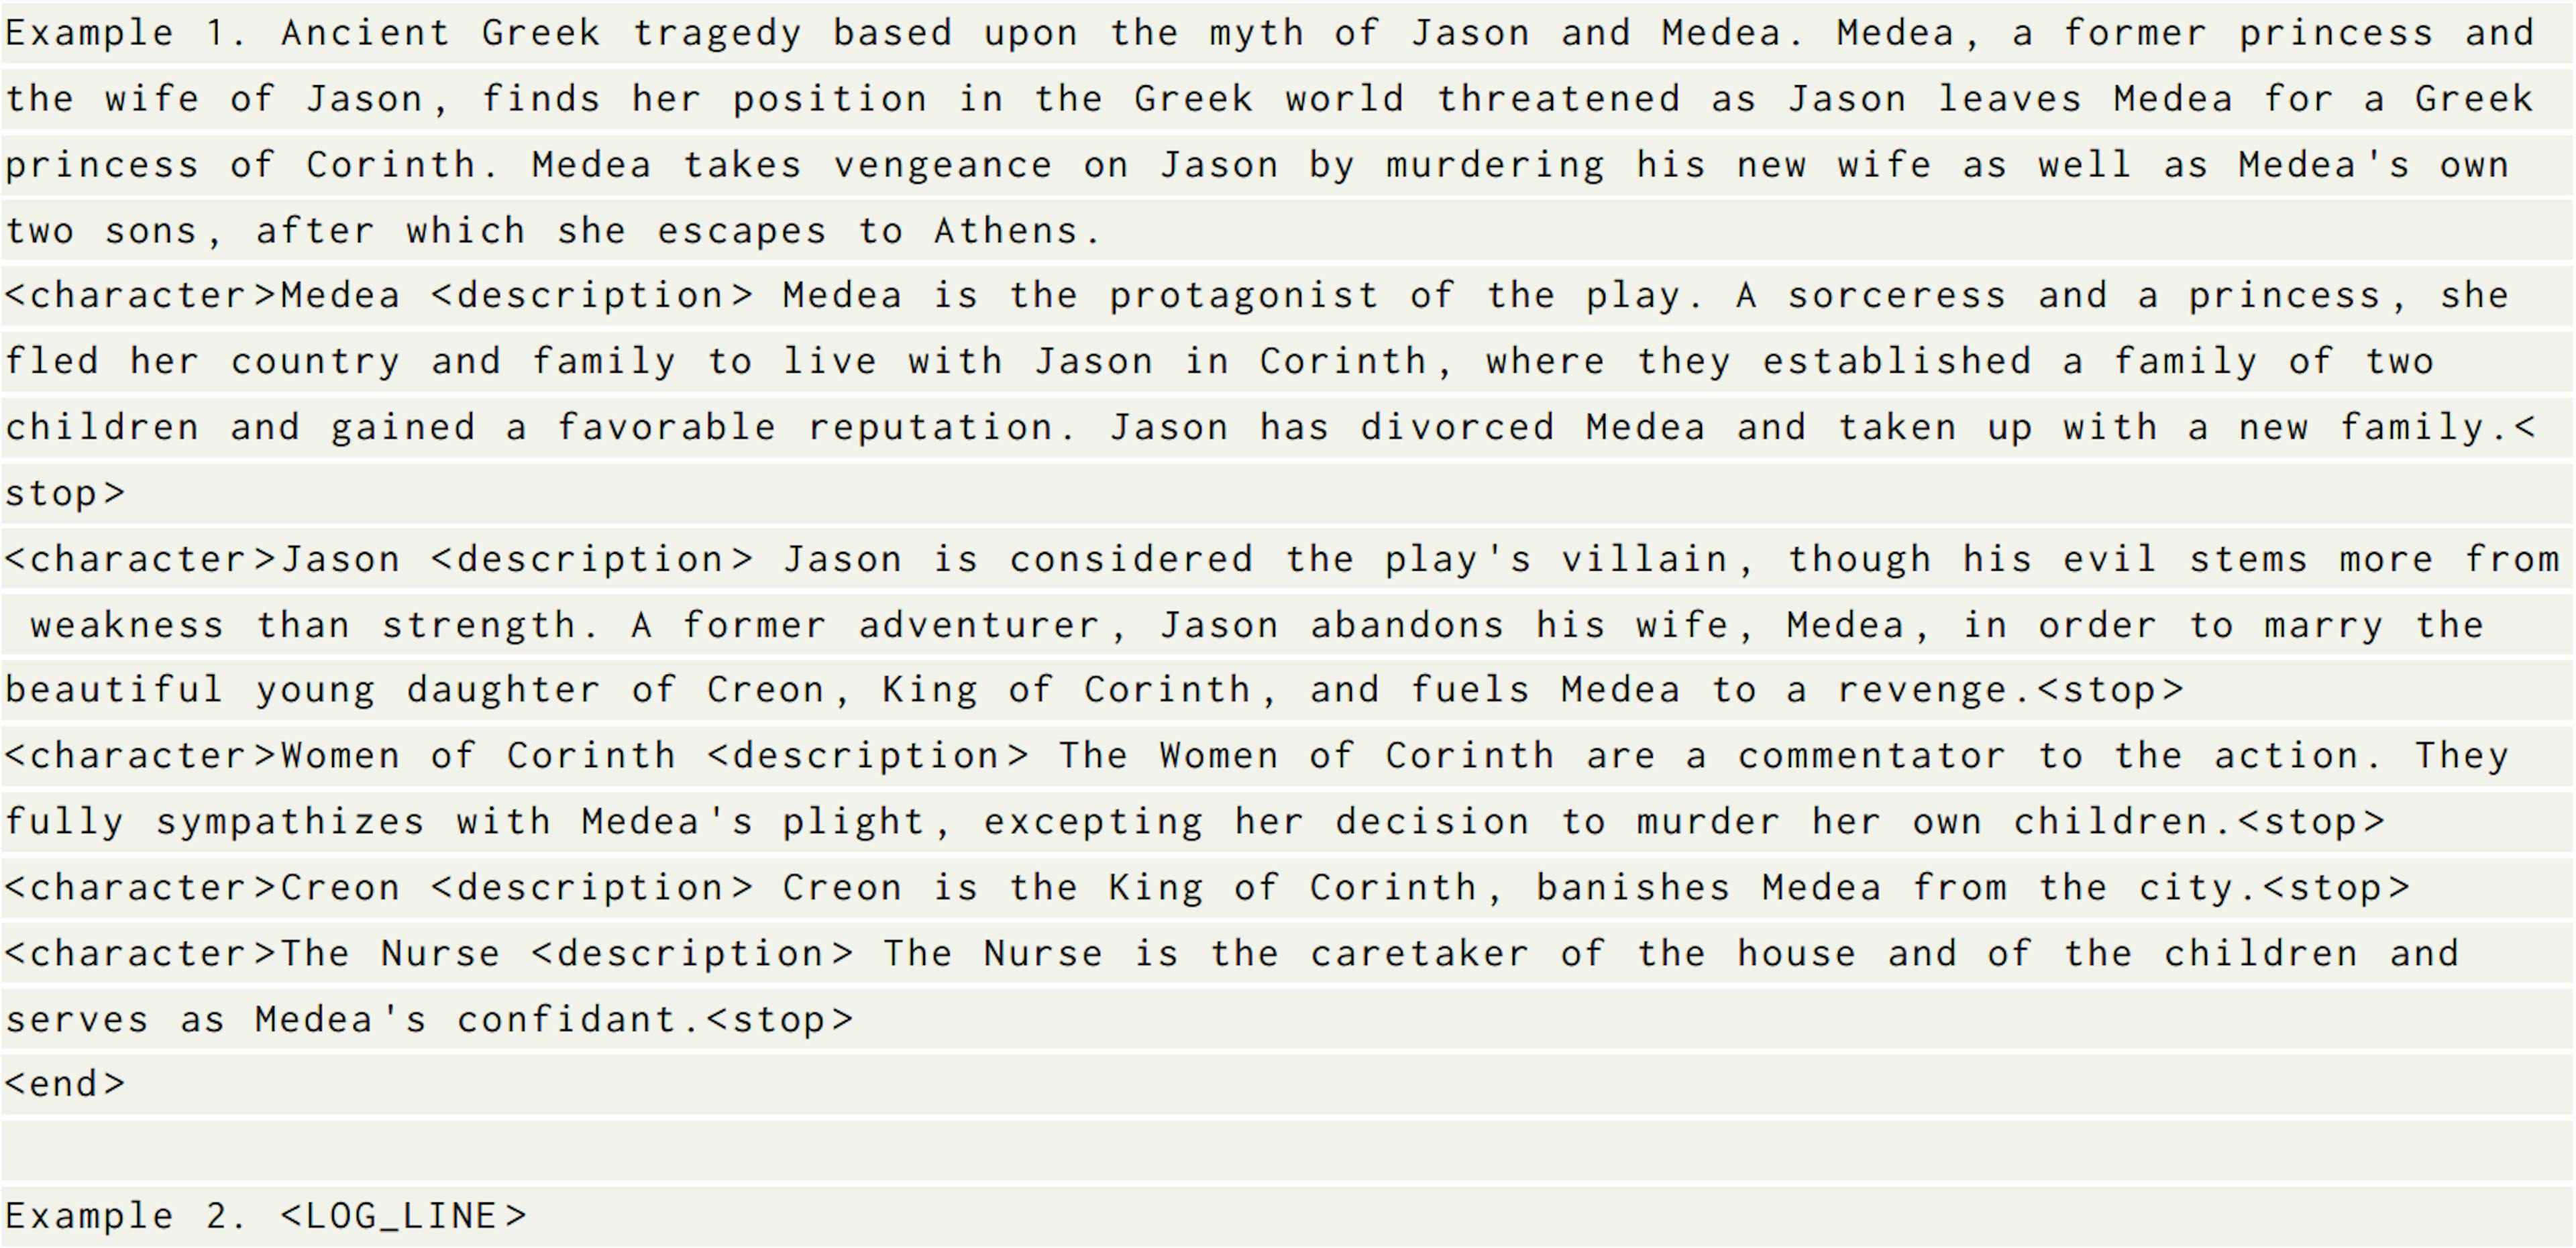 Listing 3. Character prompt prefixes to generate list of character descriptions from a log line (Medea).